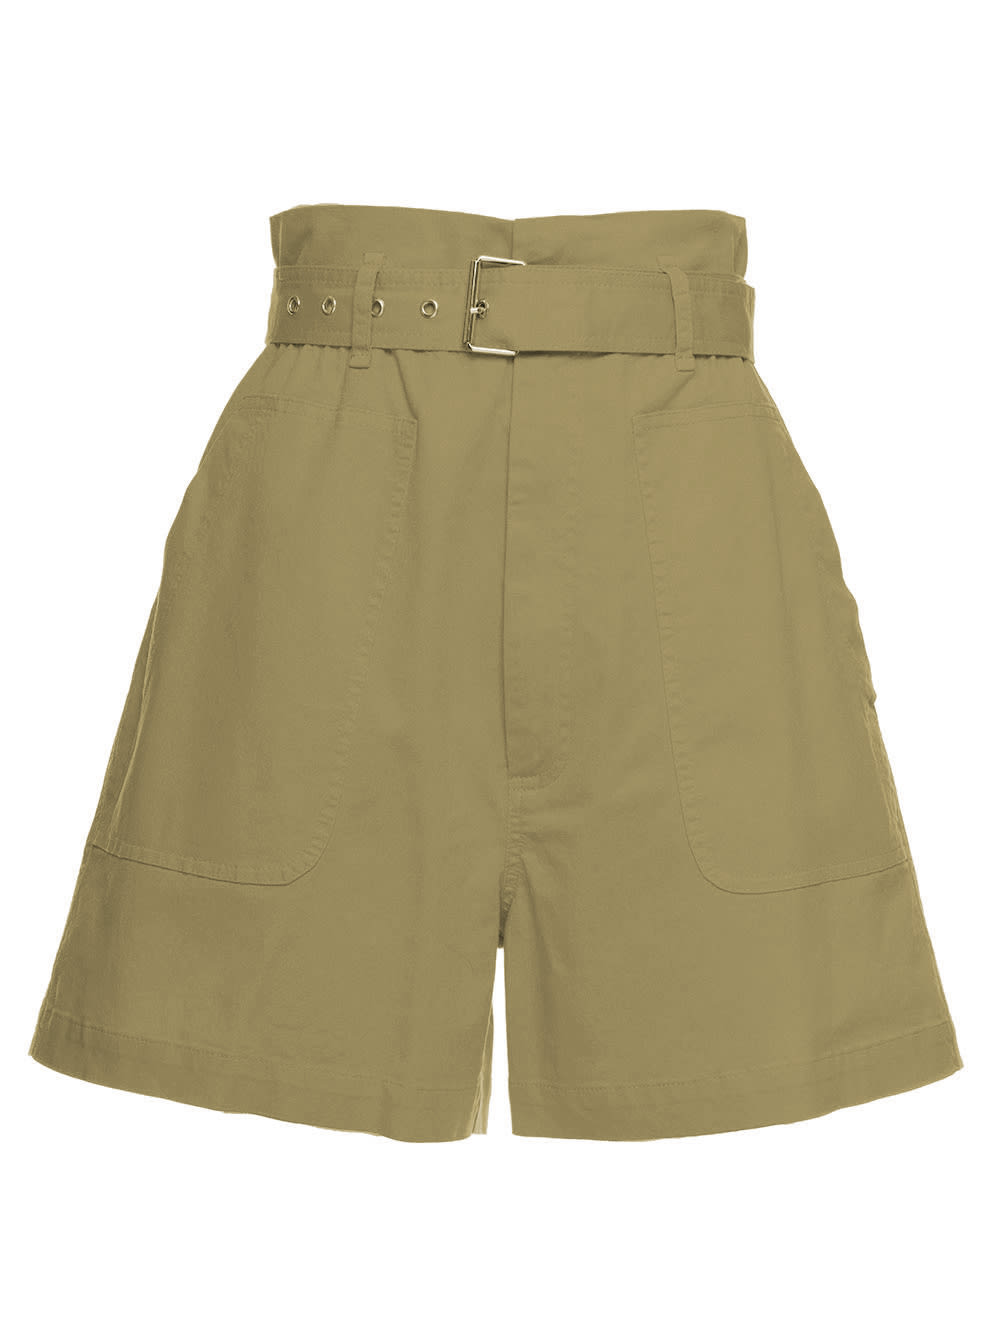 Mauro Grifoni Grifoni Womans High Waisted Cotton Green Shorts